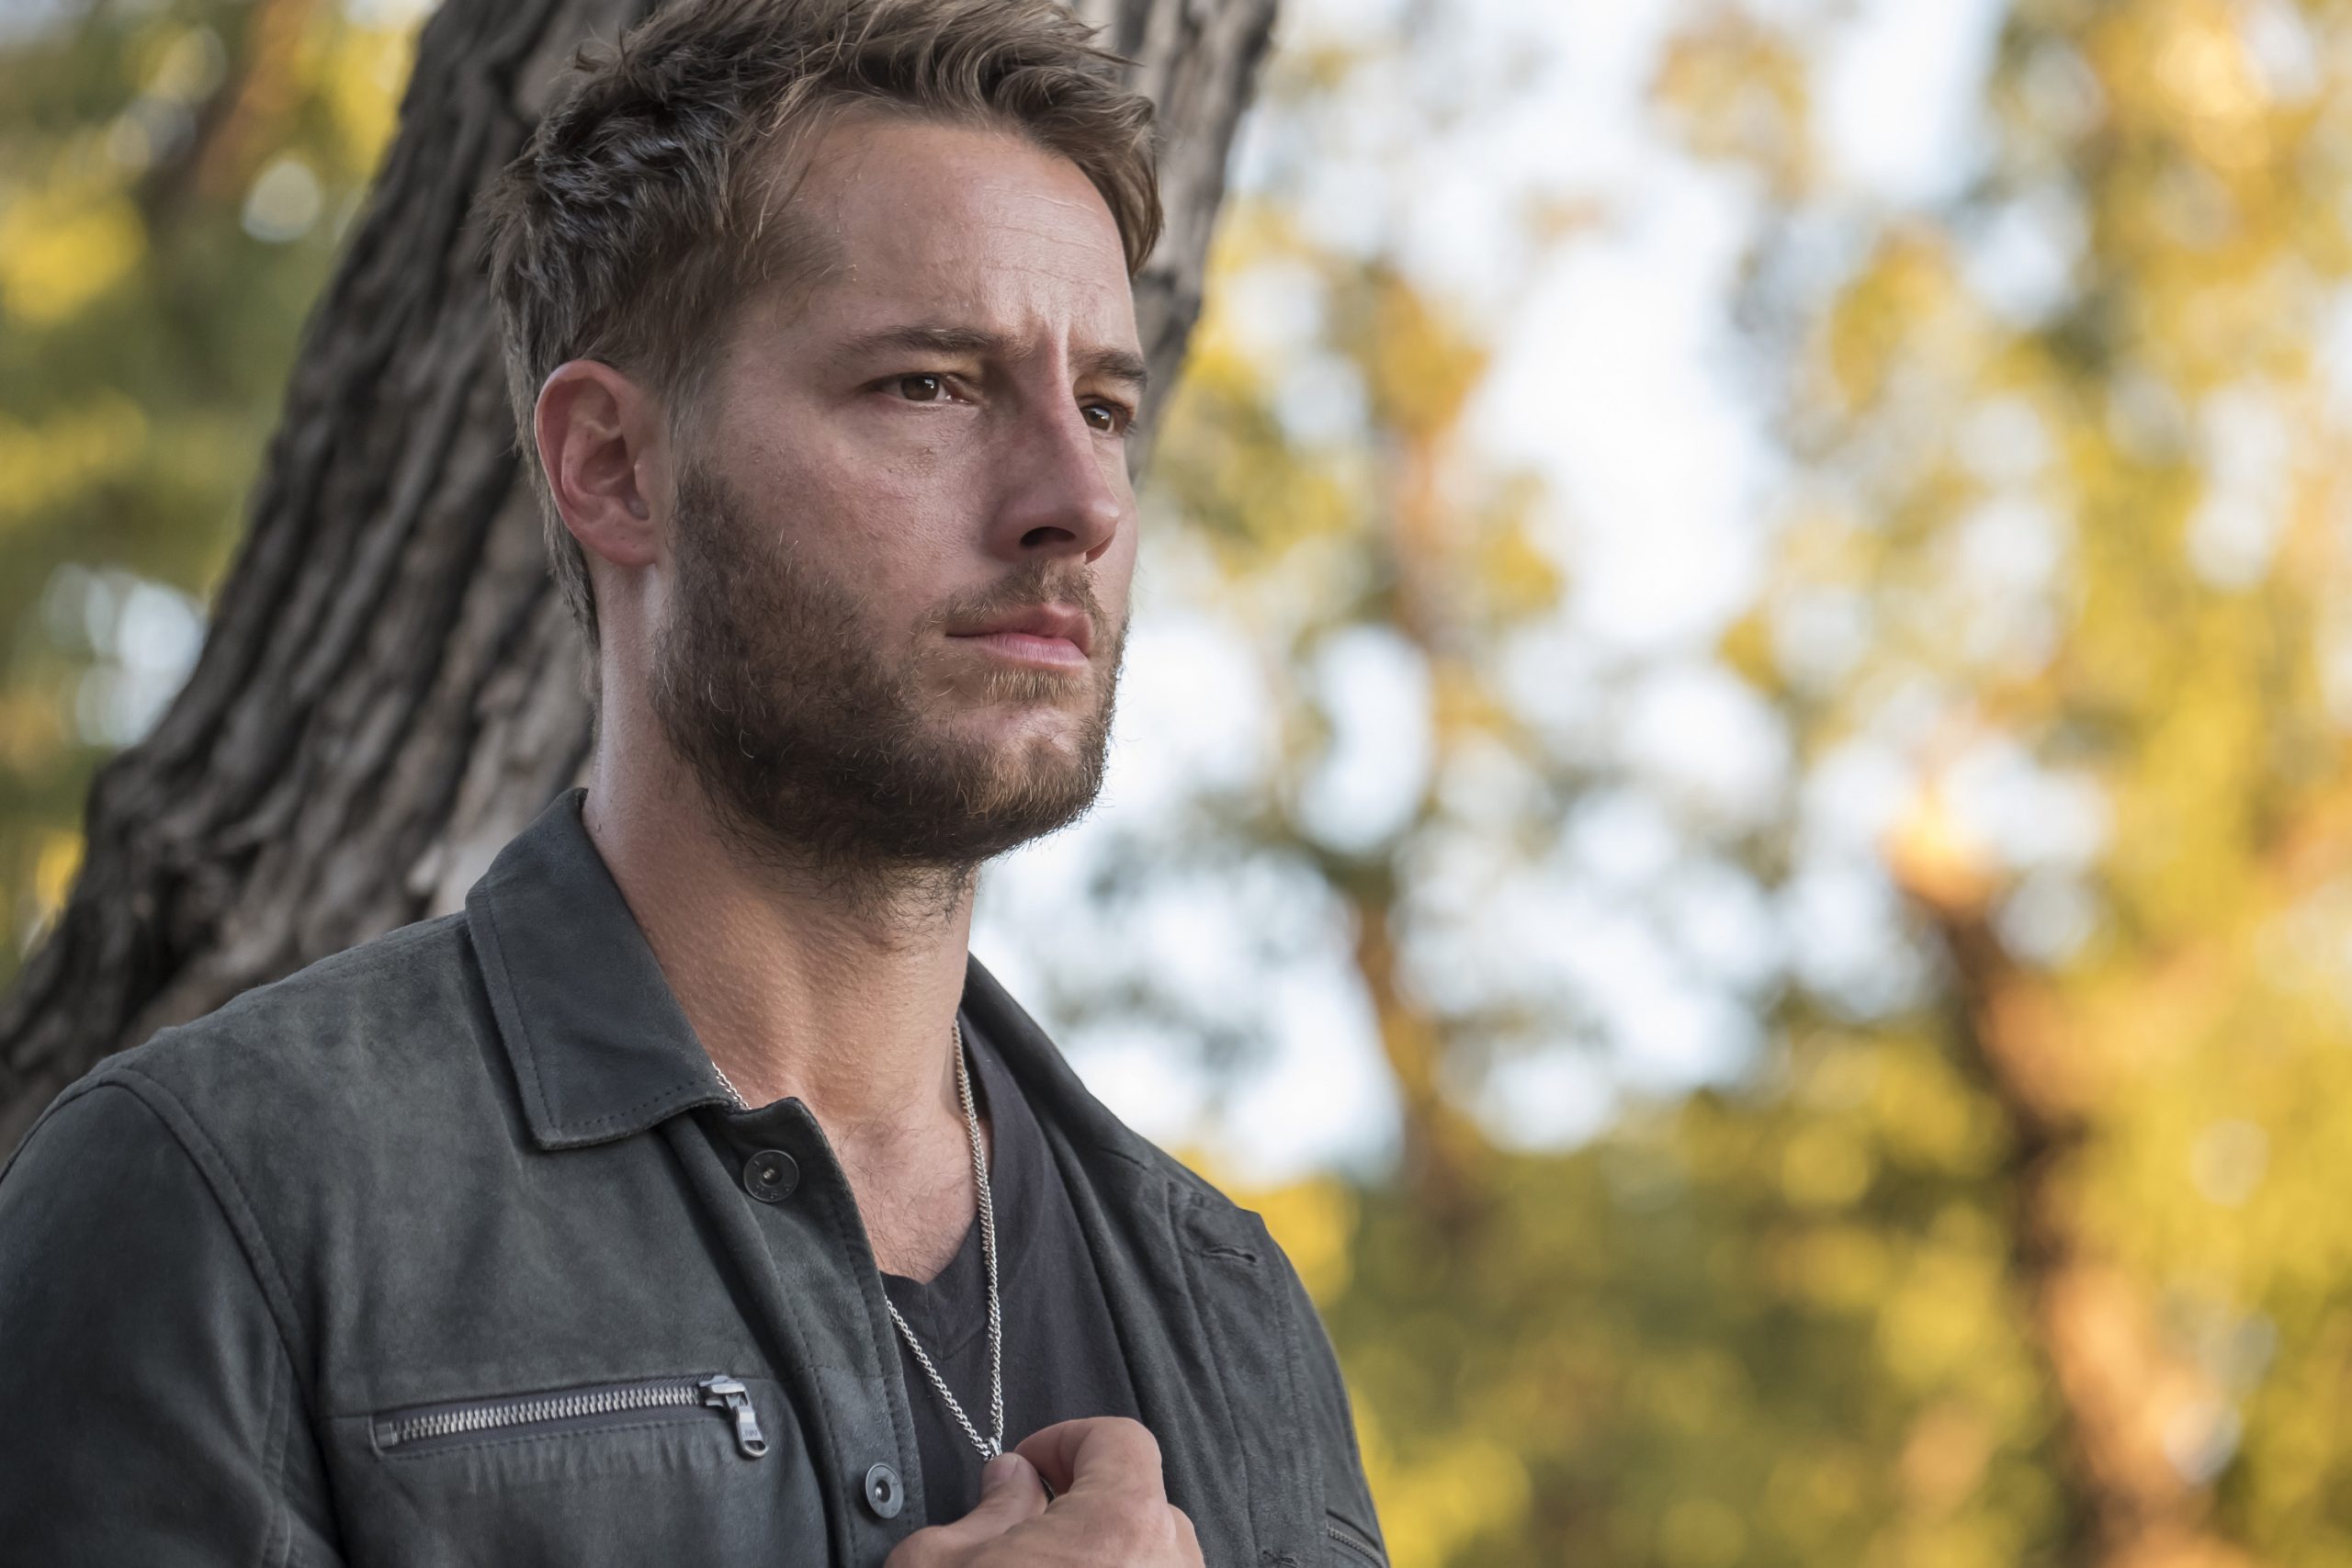 ‘This Is Us’: Justin Hartley Had the ‘Most Fun’ Portraying Kevin’s Addiction